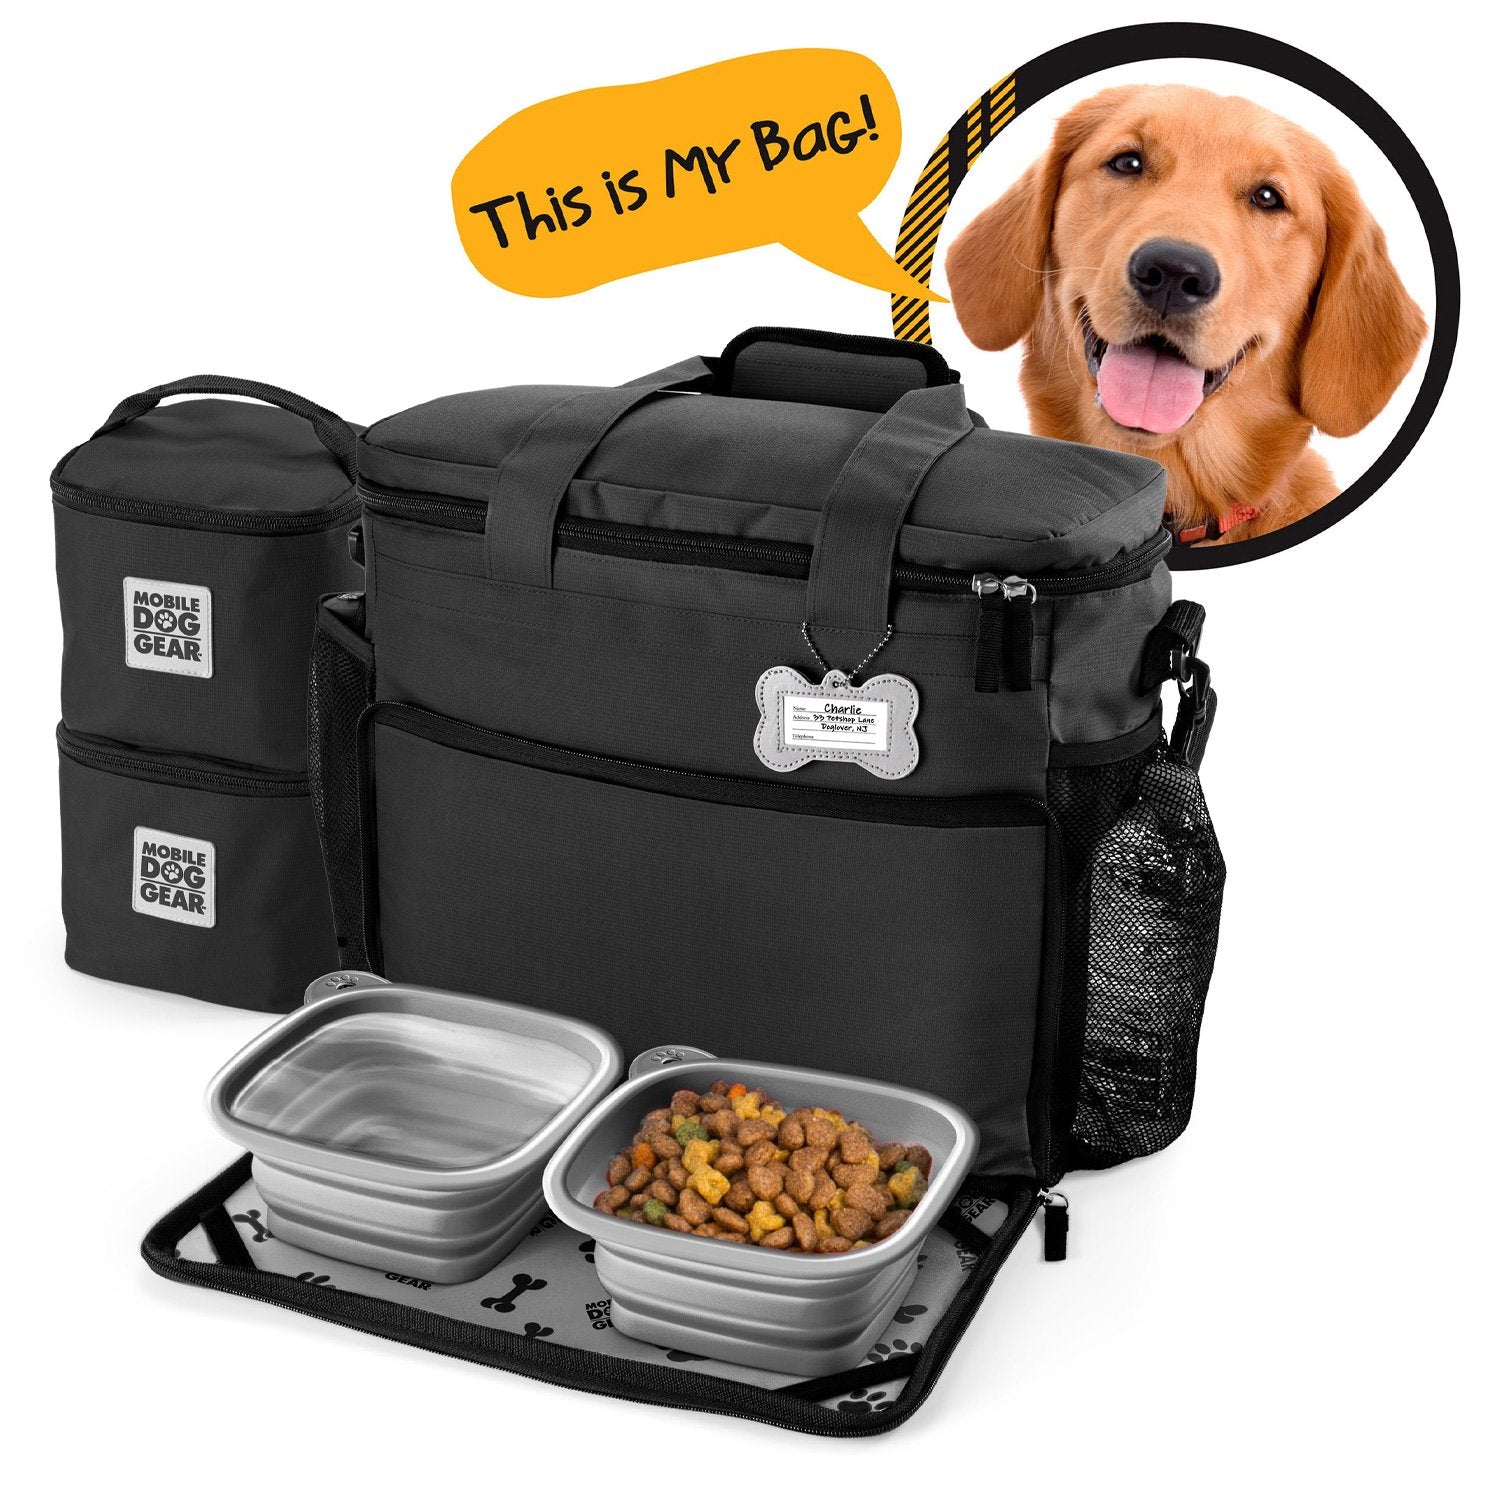 Mobile Dog Gear Jetset Collection